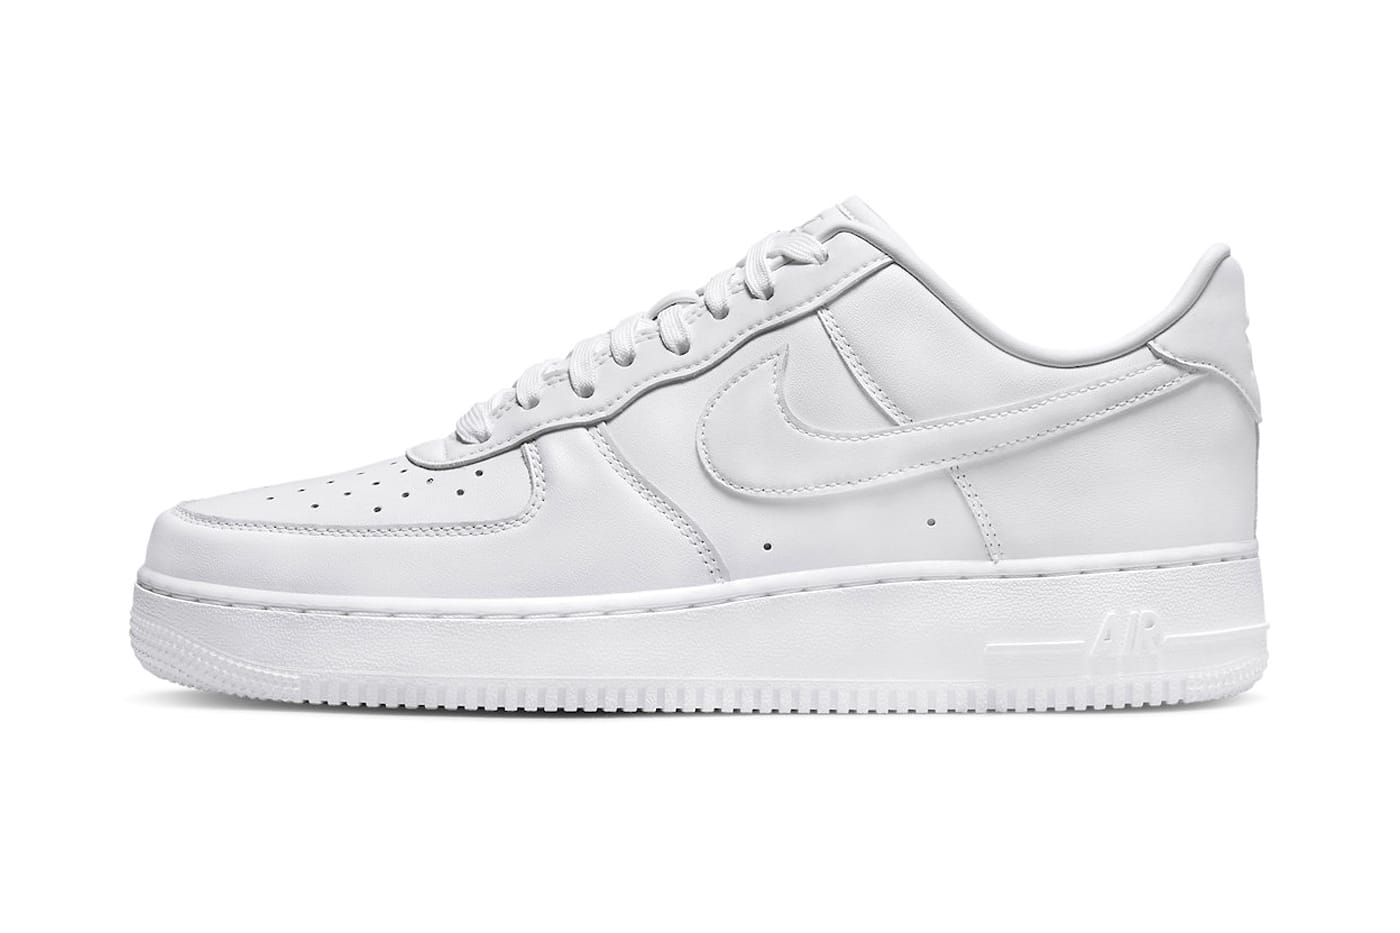 non leather nike air force 1